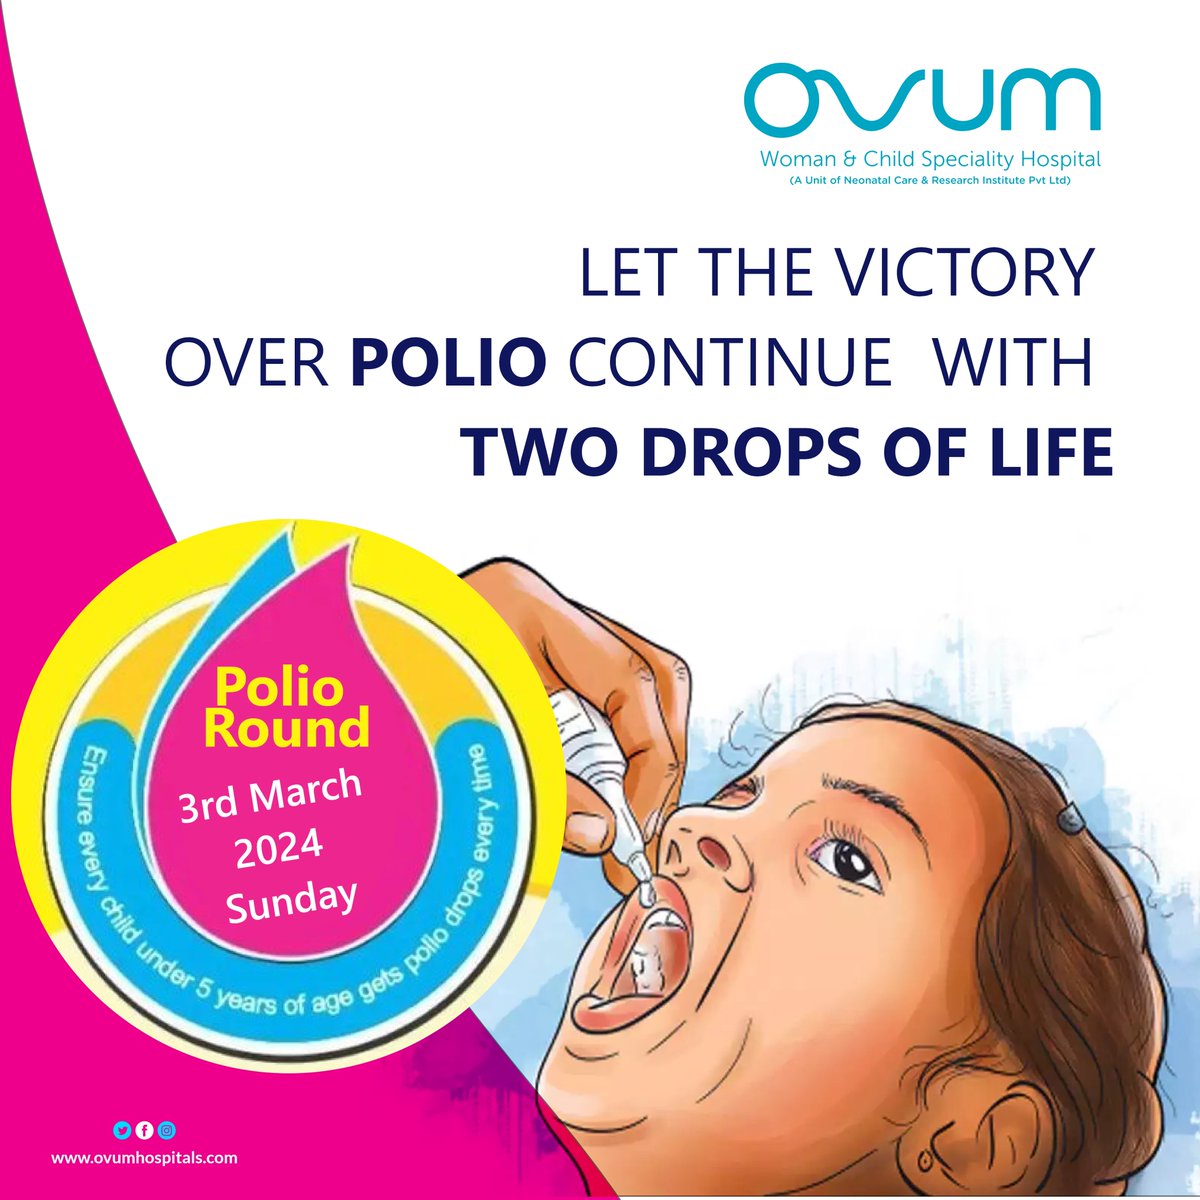 Join the Polio Triumph! 🌟 Save the date: Polio Round - March 3, 2024. Two drops secure a Polio-free future. Let's protect every child under 5. Spread the word! Together, we conquer Polio. #poliofreefuture #twodropsoflife